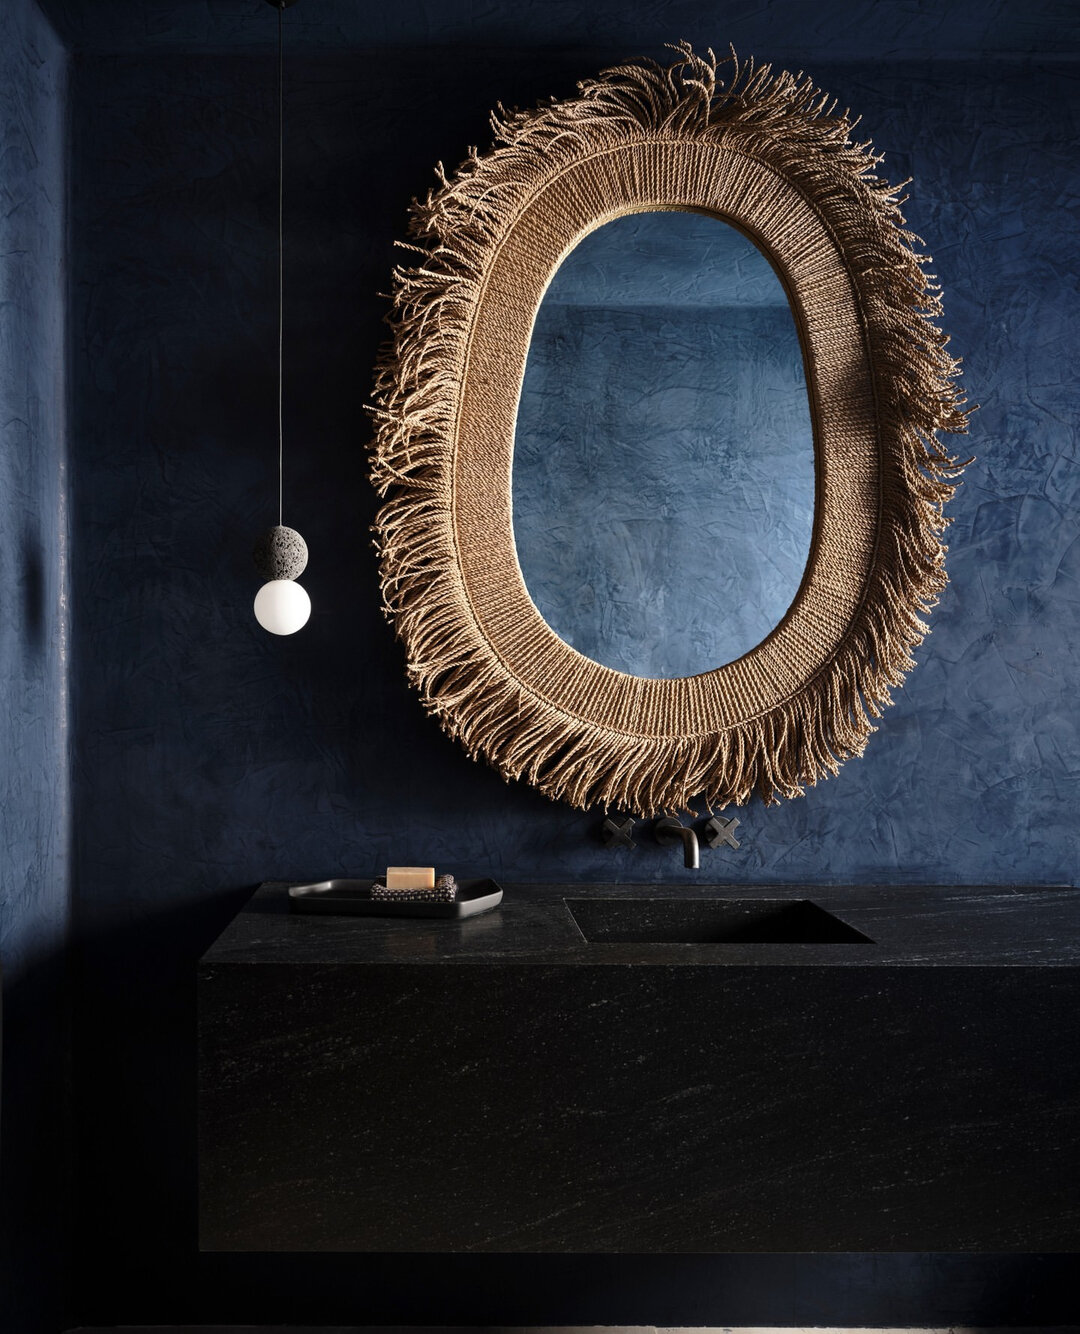 Reflecting on the beauty of organic shapes 🌿 These mirrors bring a natural touch to any space! We'll even show you how to style them in your space. Click the link in the bio for the post. #organicdecor #shoplocal #homedecorideas #mirrors​​​​​​​​​
📷